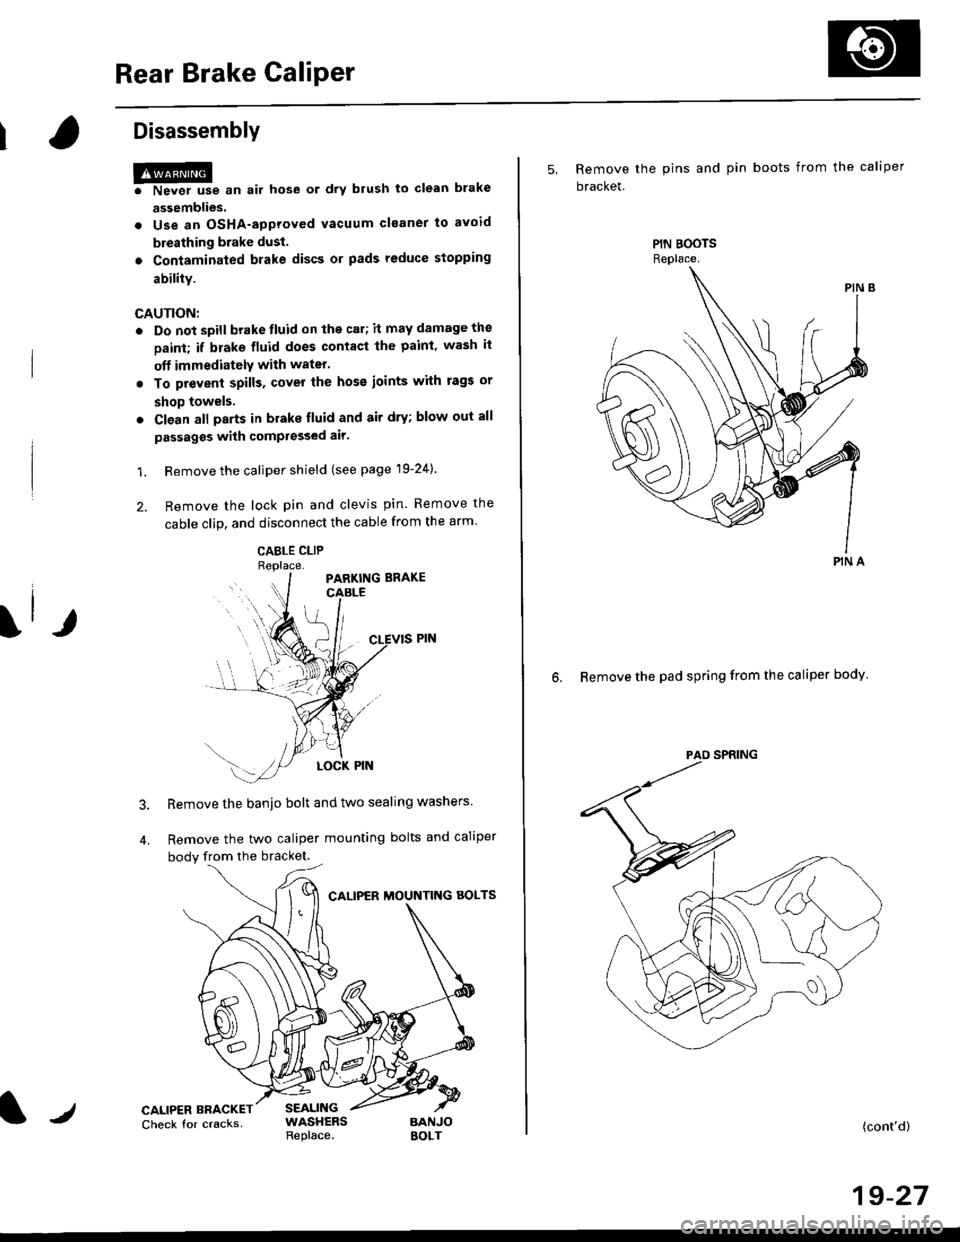 HONDA CIVIC 1999 6.G Owners Manual Rear Brake Caliper
Disassembly
@f l,lever use an air hose or dry brush to clean
assemblies.
. Use an OsHA-approved vacuum cleaner to
brake
avoid
breathing brake dust.
. Contaminated brake discs or pa